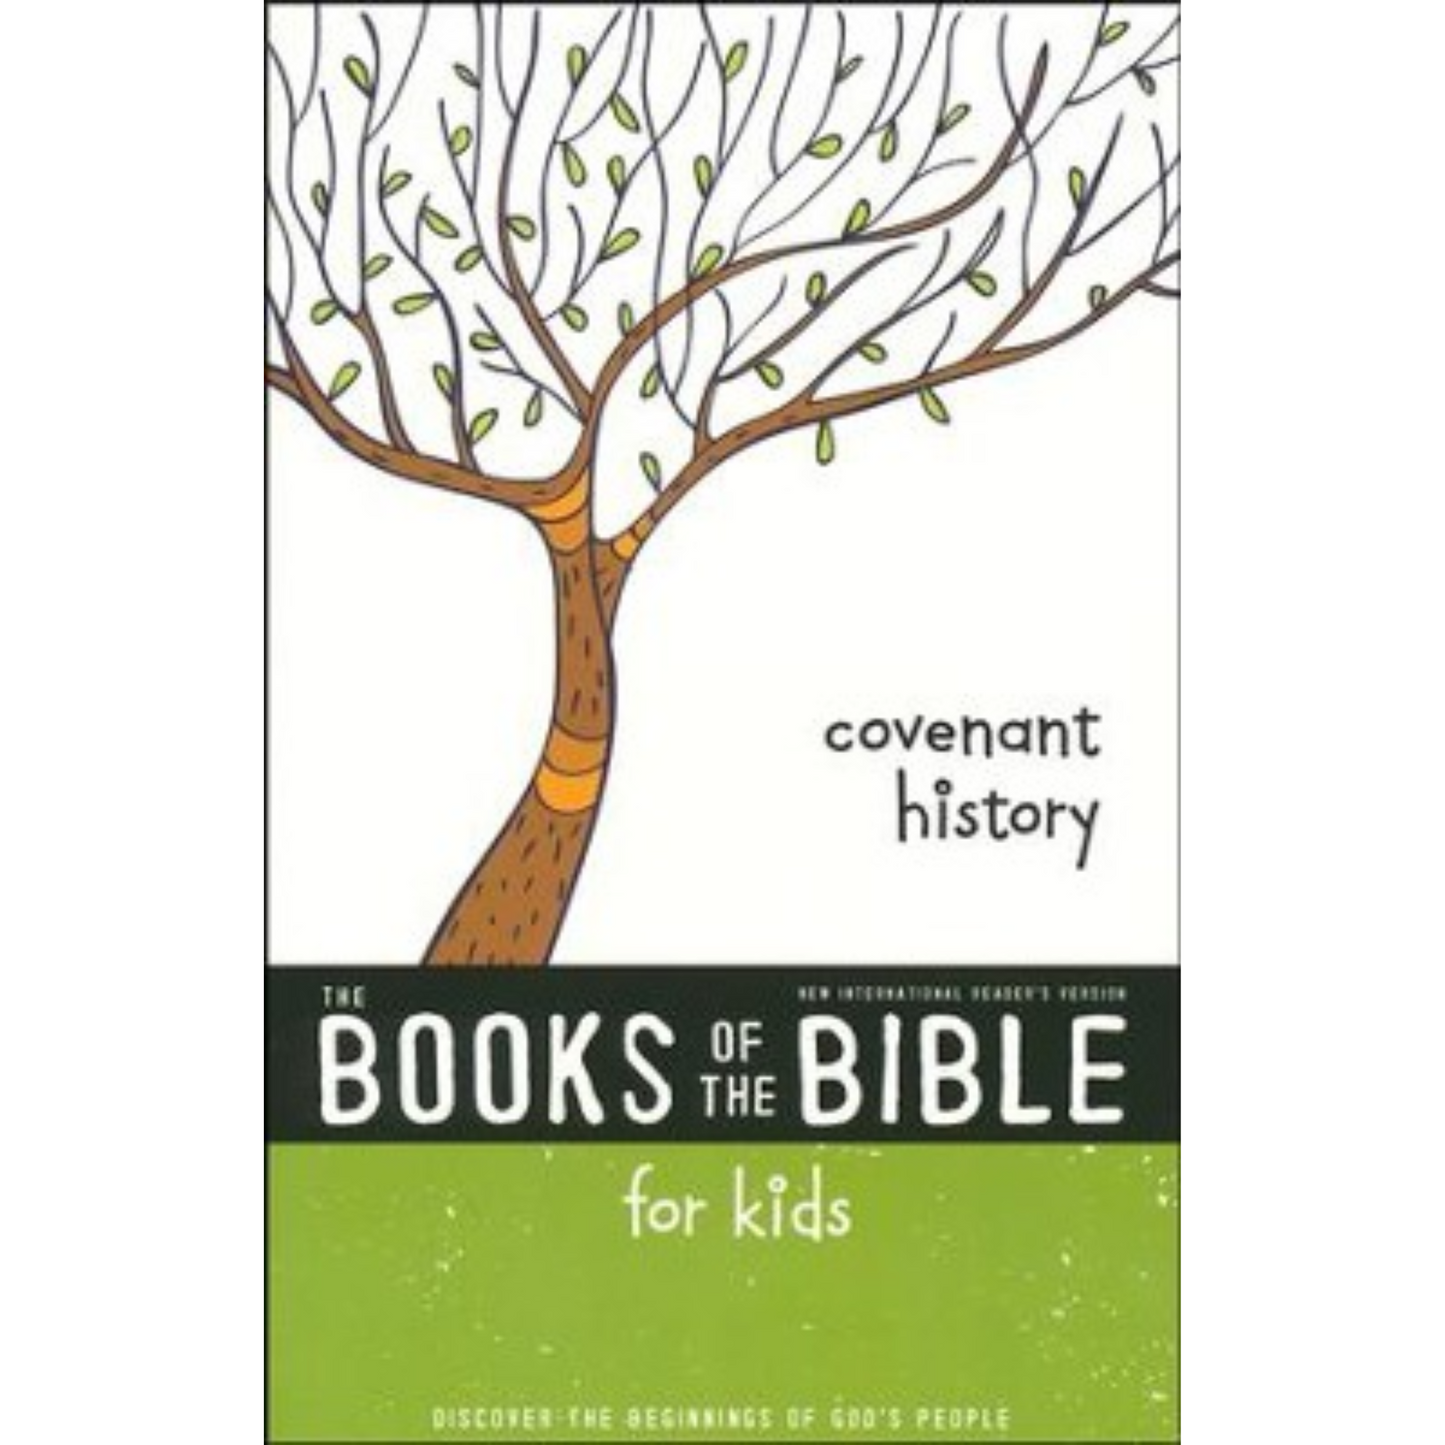 NIrV The Books of the Bible for Kids: Covenant History